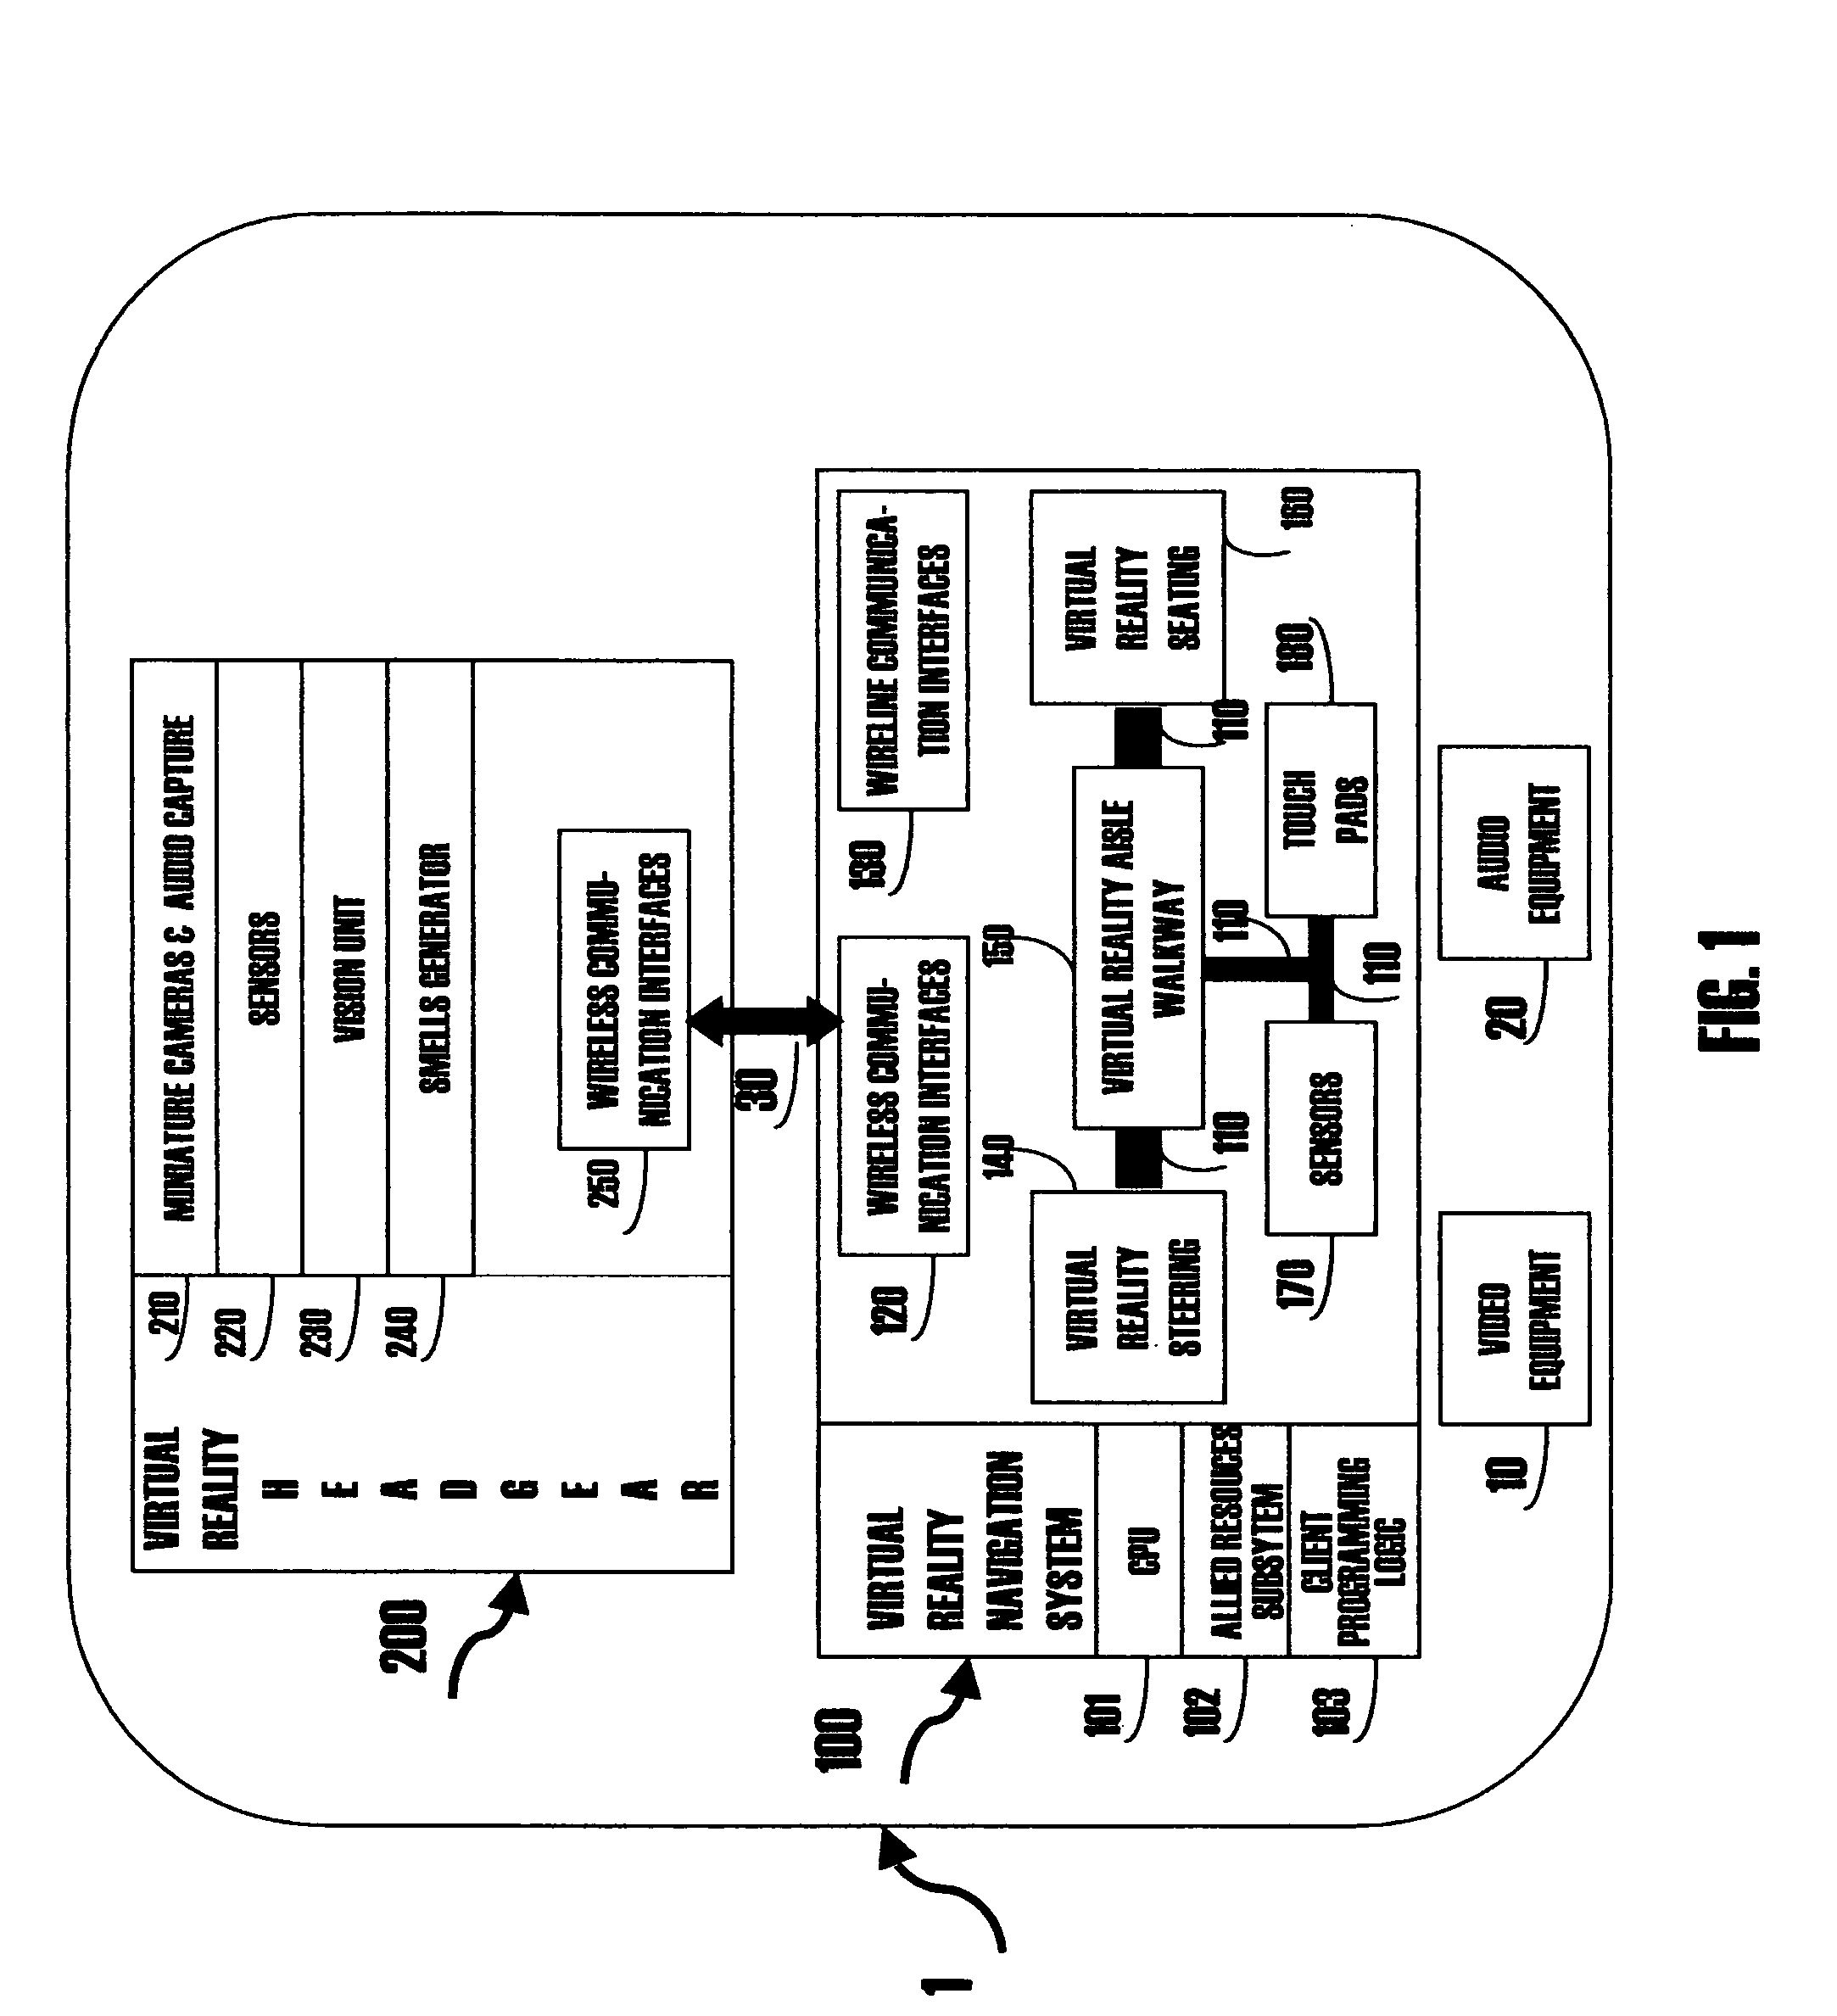 System and method for delivering real time remote buying, selling, meeting, and interacting in a virtual reality environment